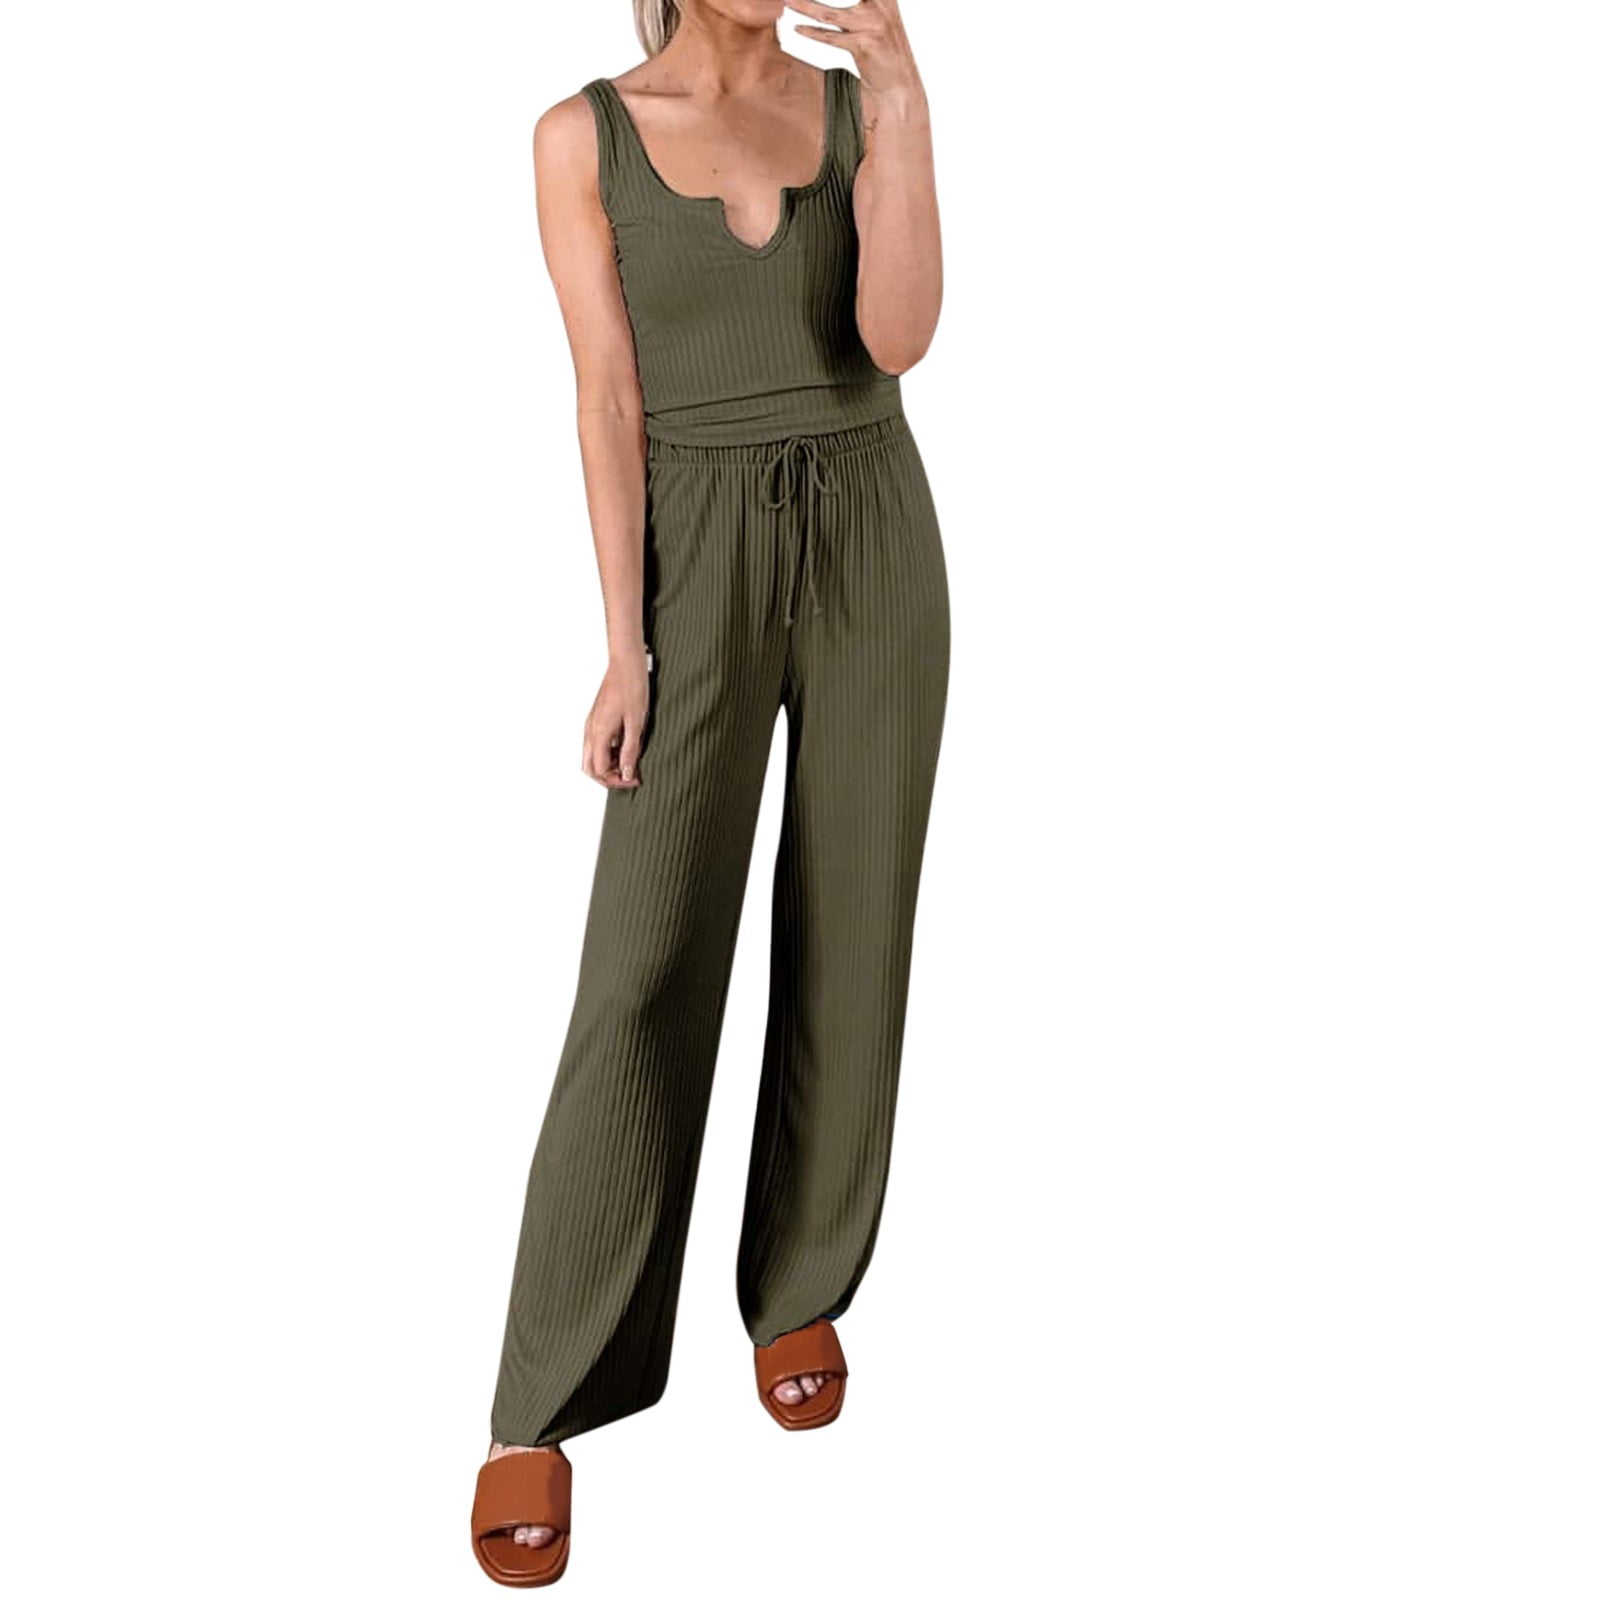 HSMQHJWE Petite Pant Suits For Women Dressy Wedding Jumpsuit For